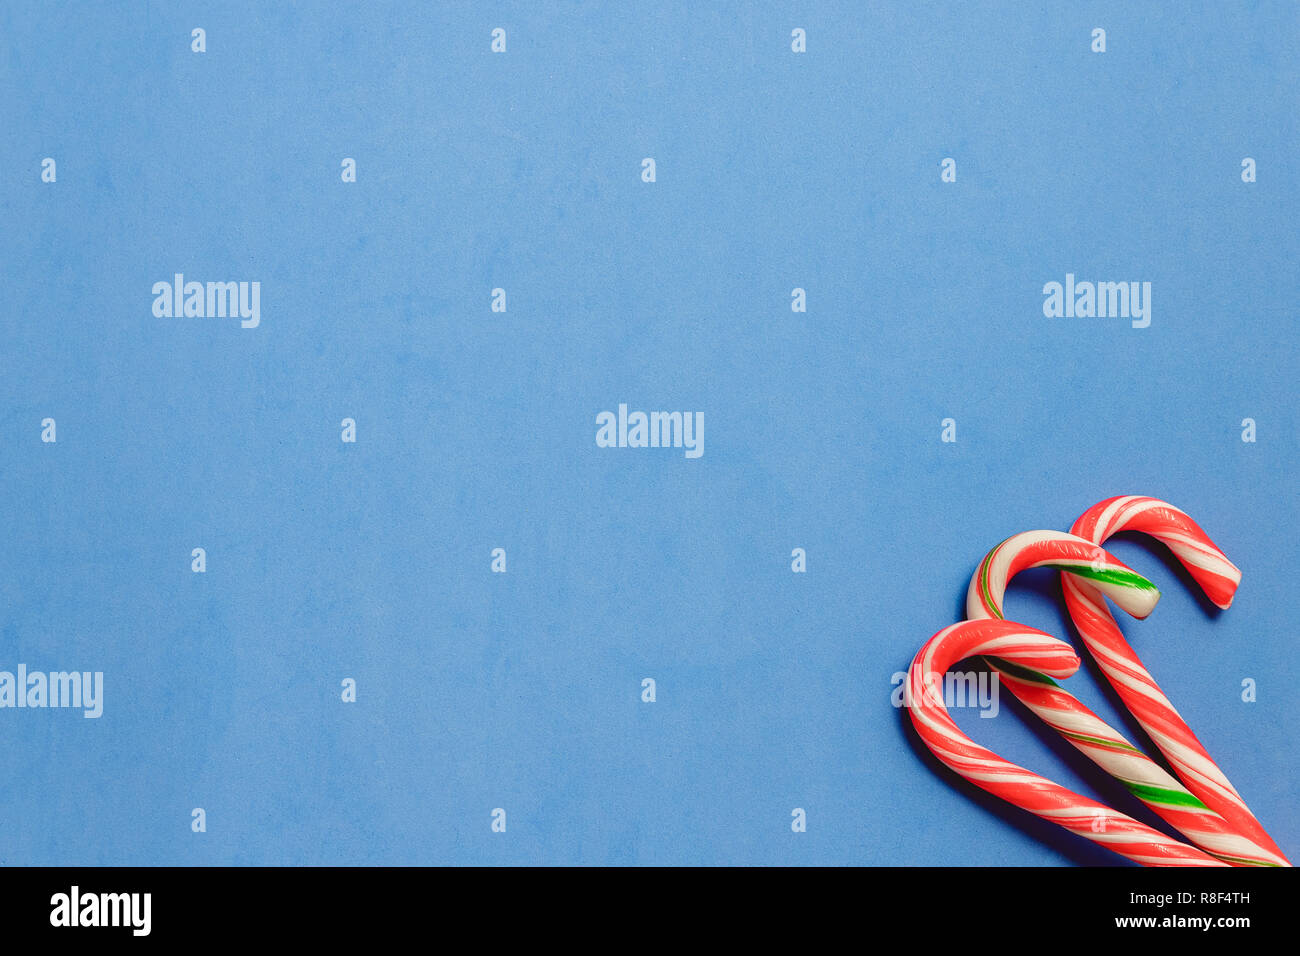 Top view three candy canes on blue background. Stock Photo